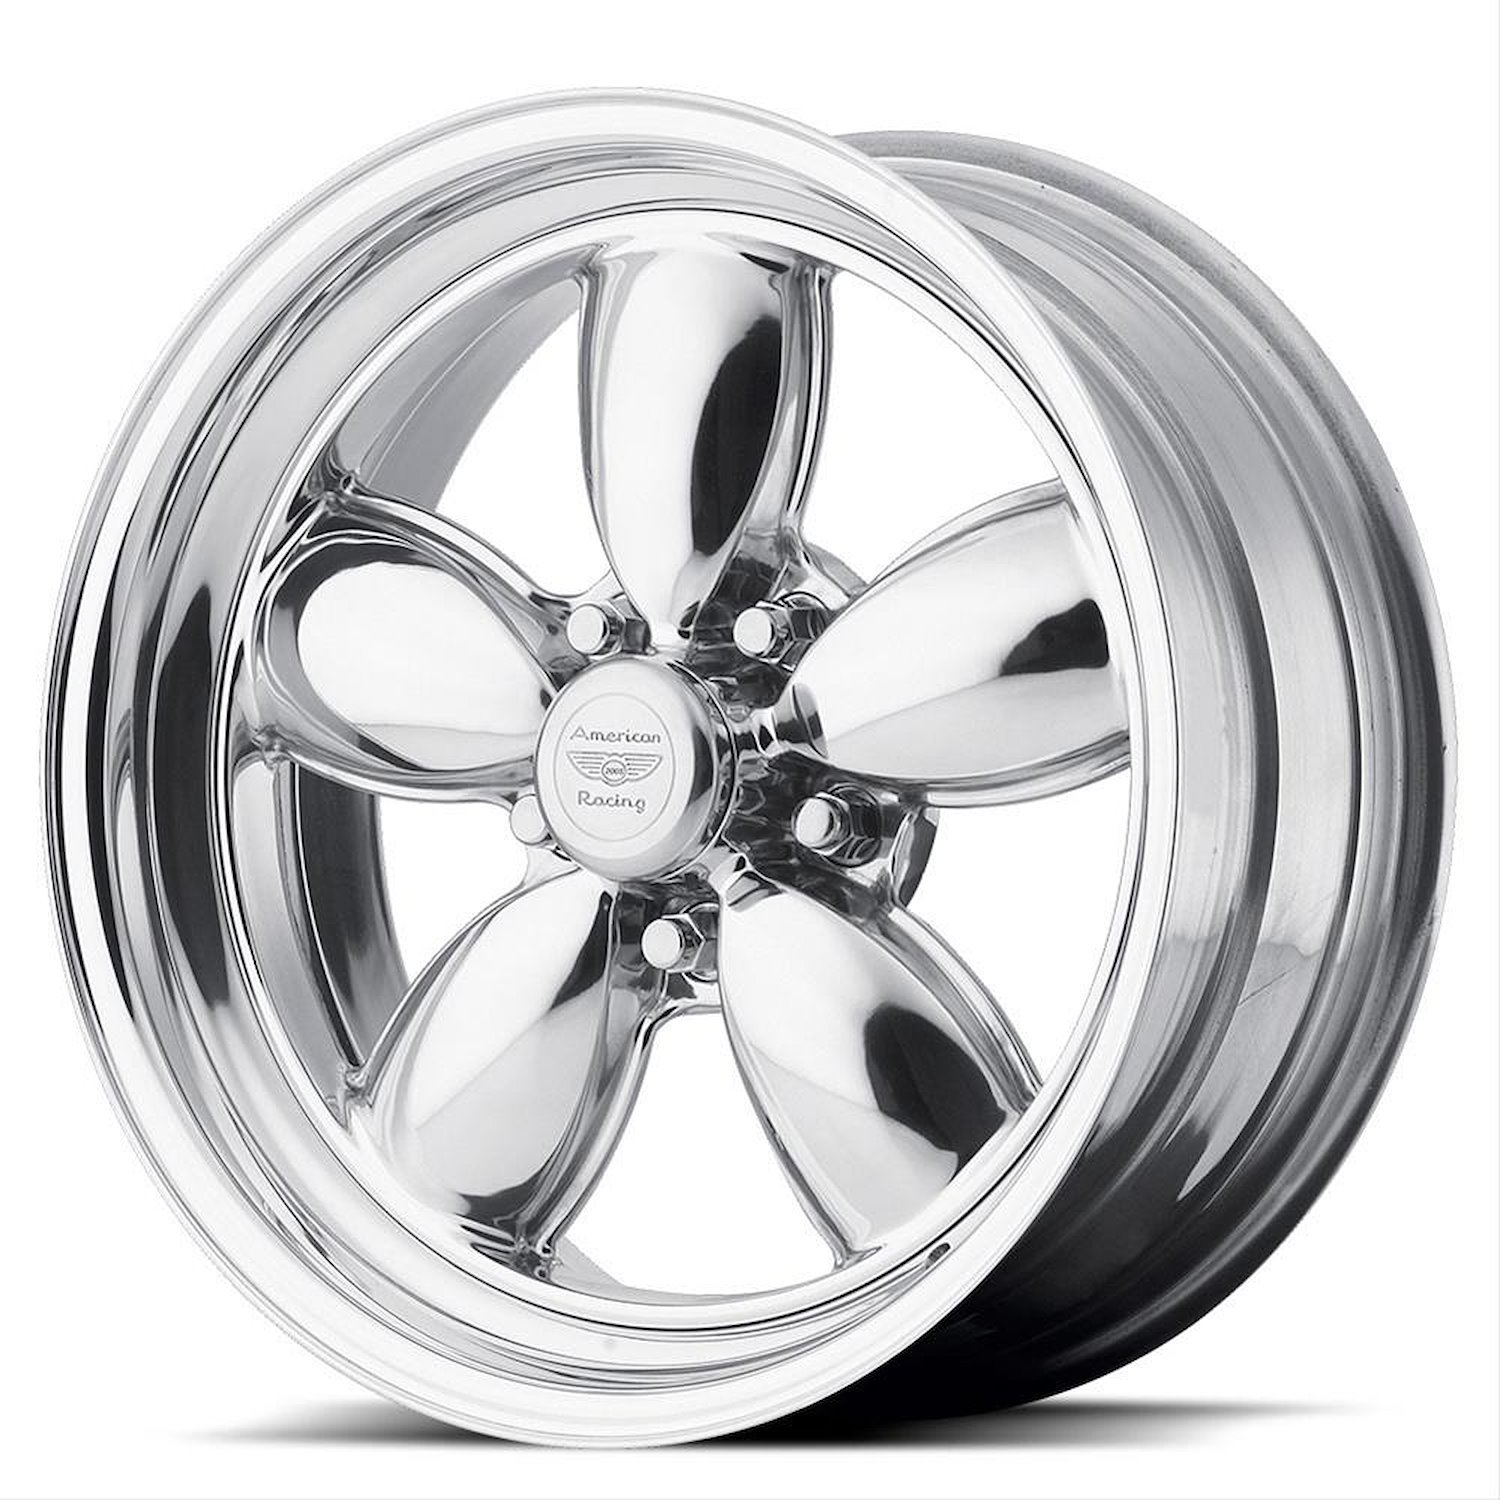 AMERICAN RACING CLASSIC 200S TWO-PIECE POLISHED 15 x 12 5X4.75 -70 3.74